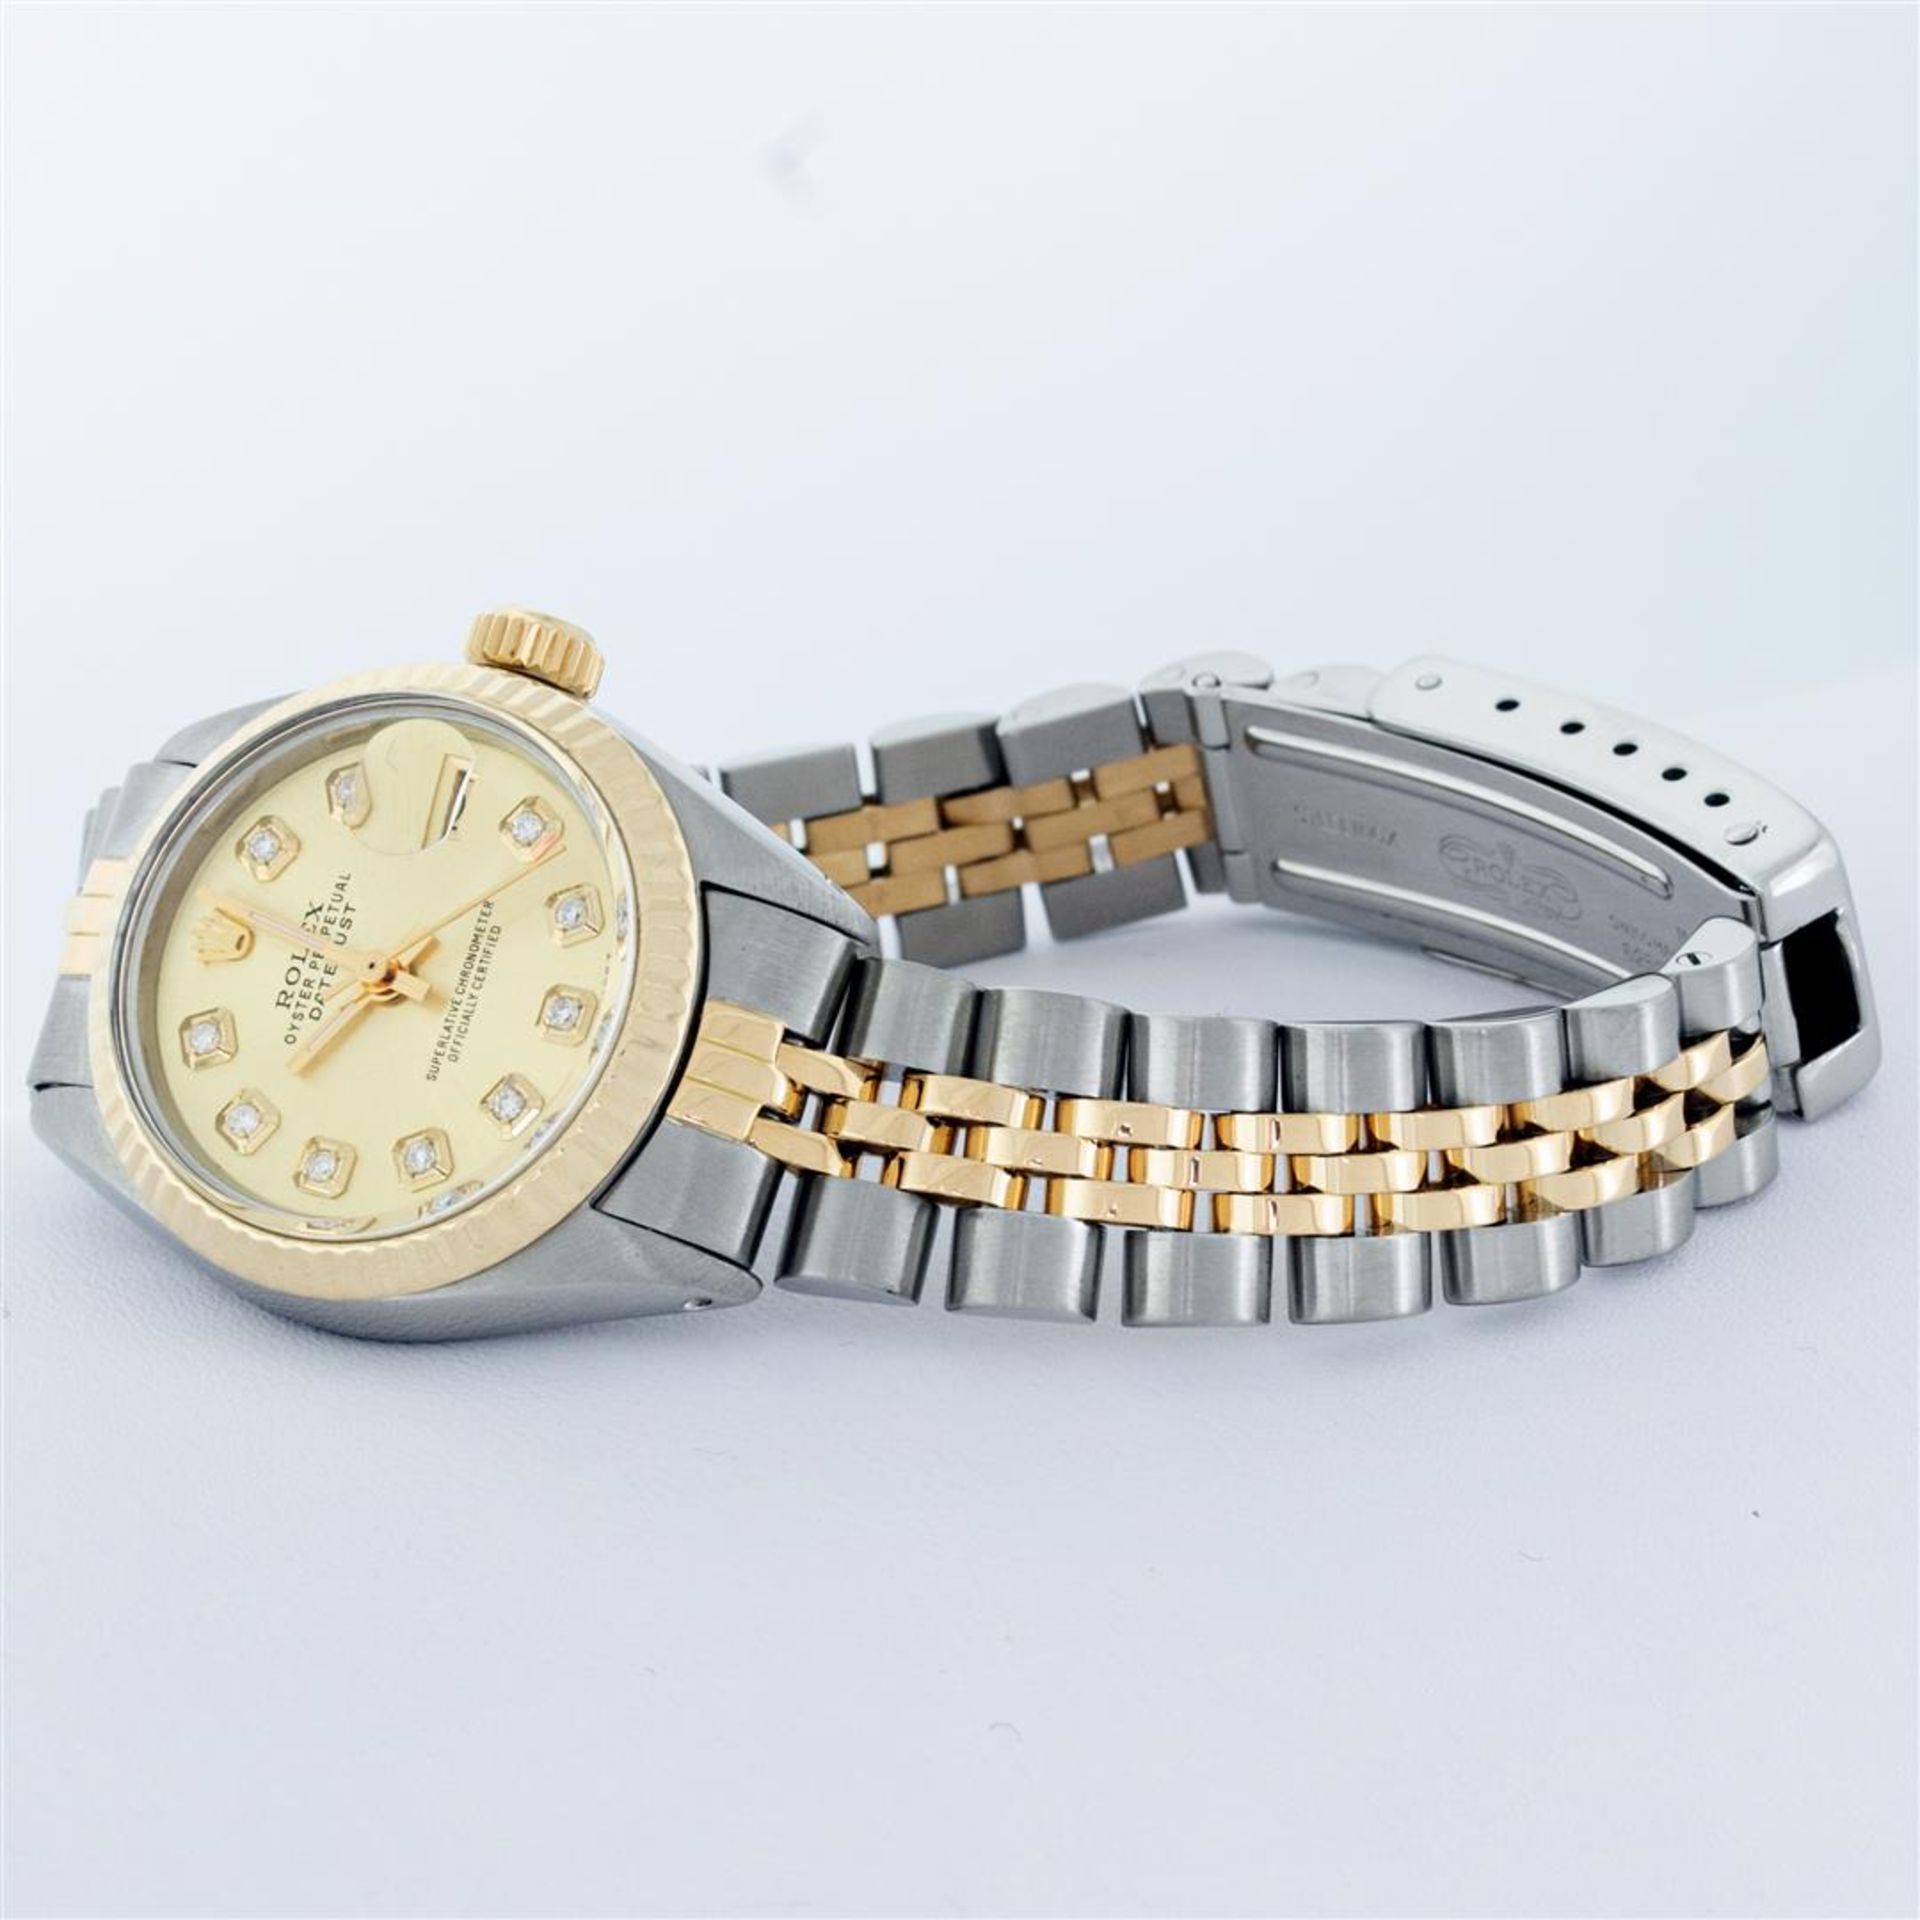 Rolex Ladies 2 Tone Champagne Diamond 26MM Oyster Perpetual Datejust Wristwatch - Image 8 of 9